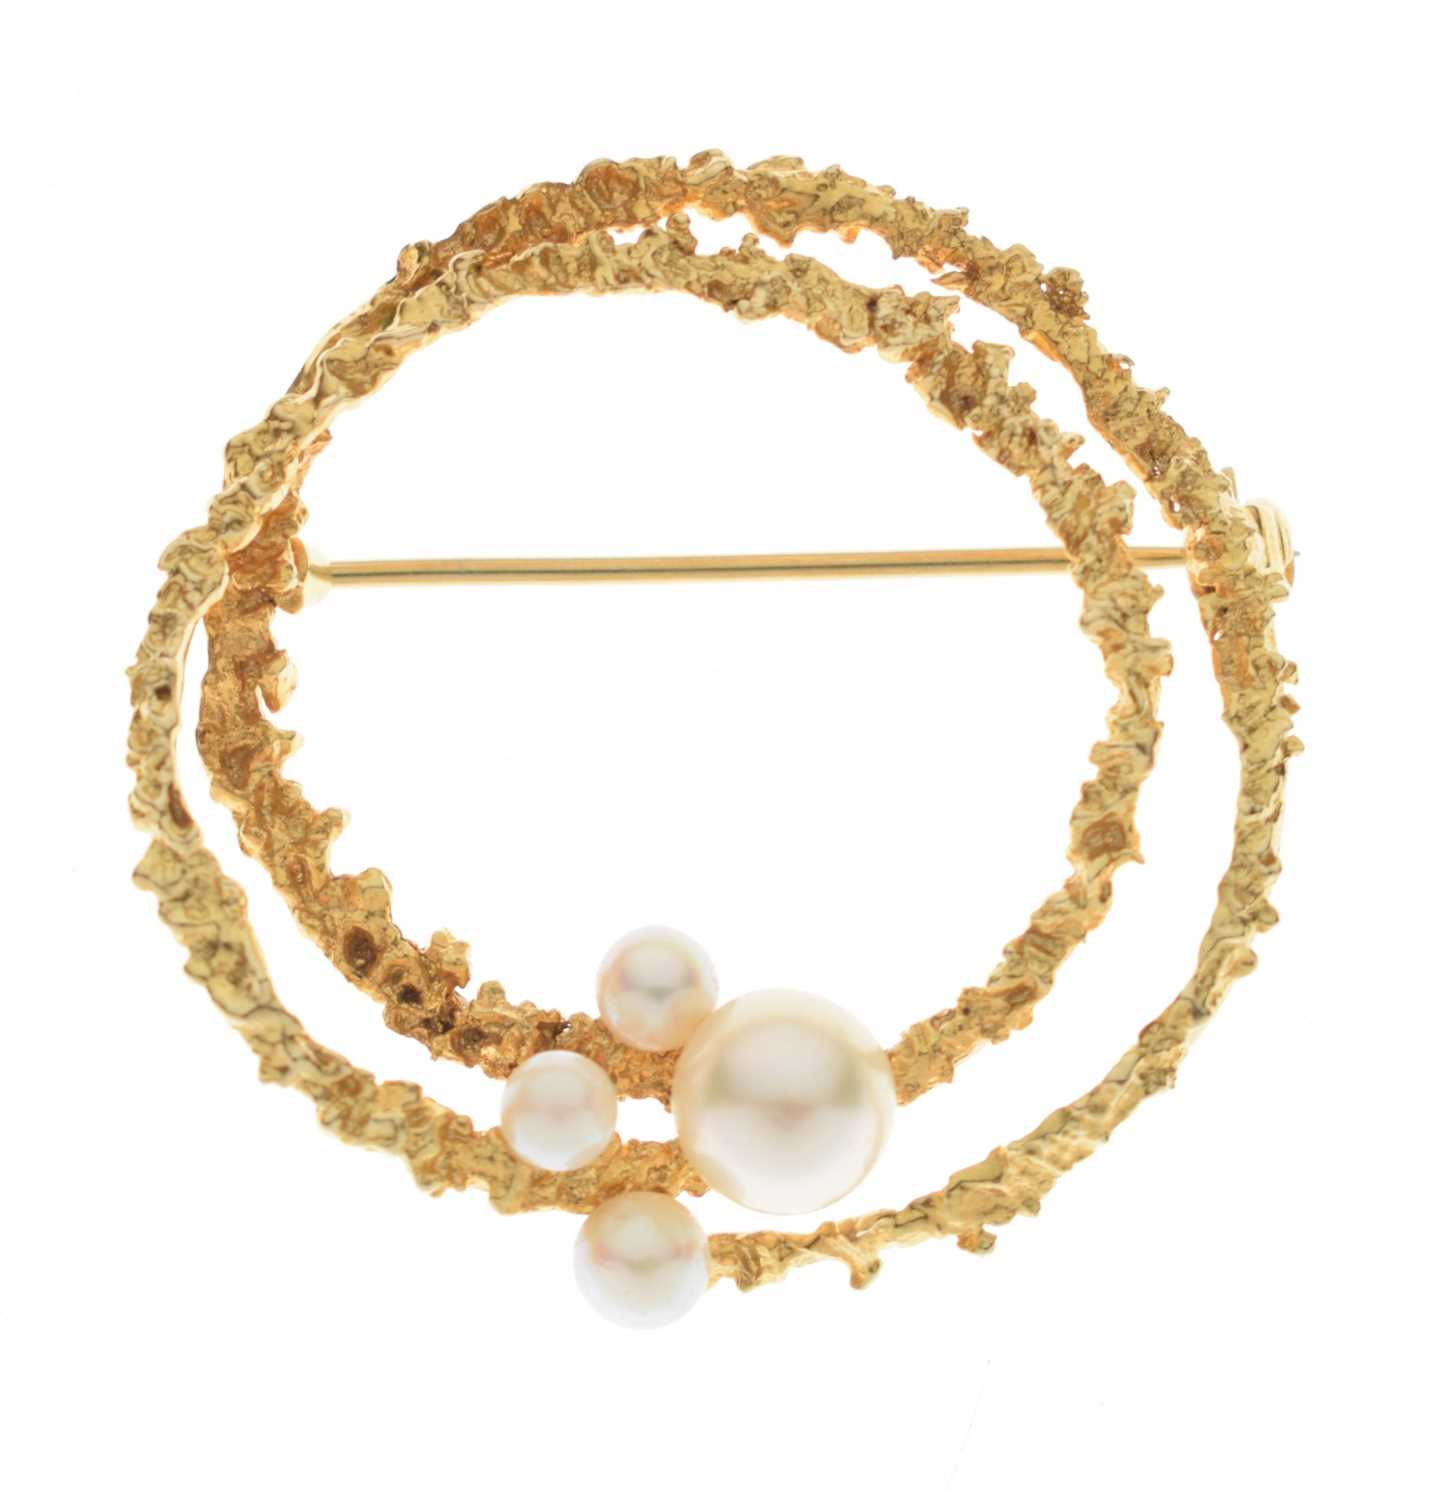 Lot 27 - Modernist circular brooch of two entwined textured rings set four graduated cultured pearls